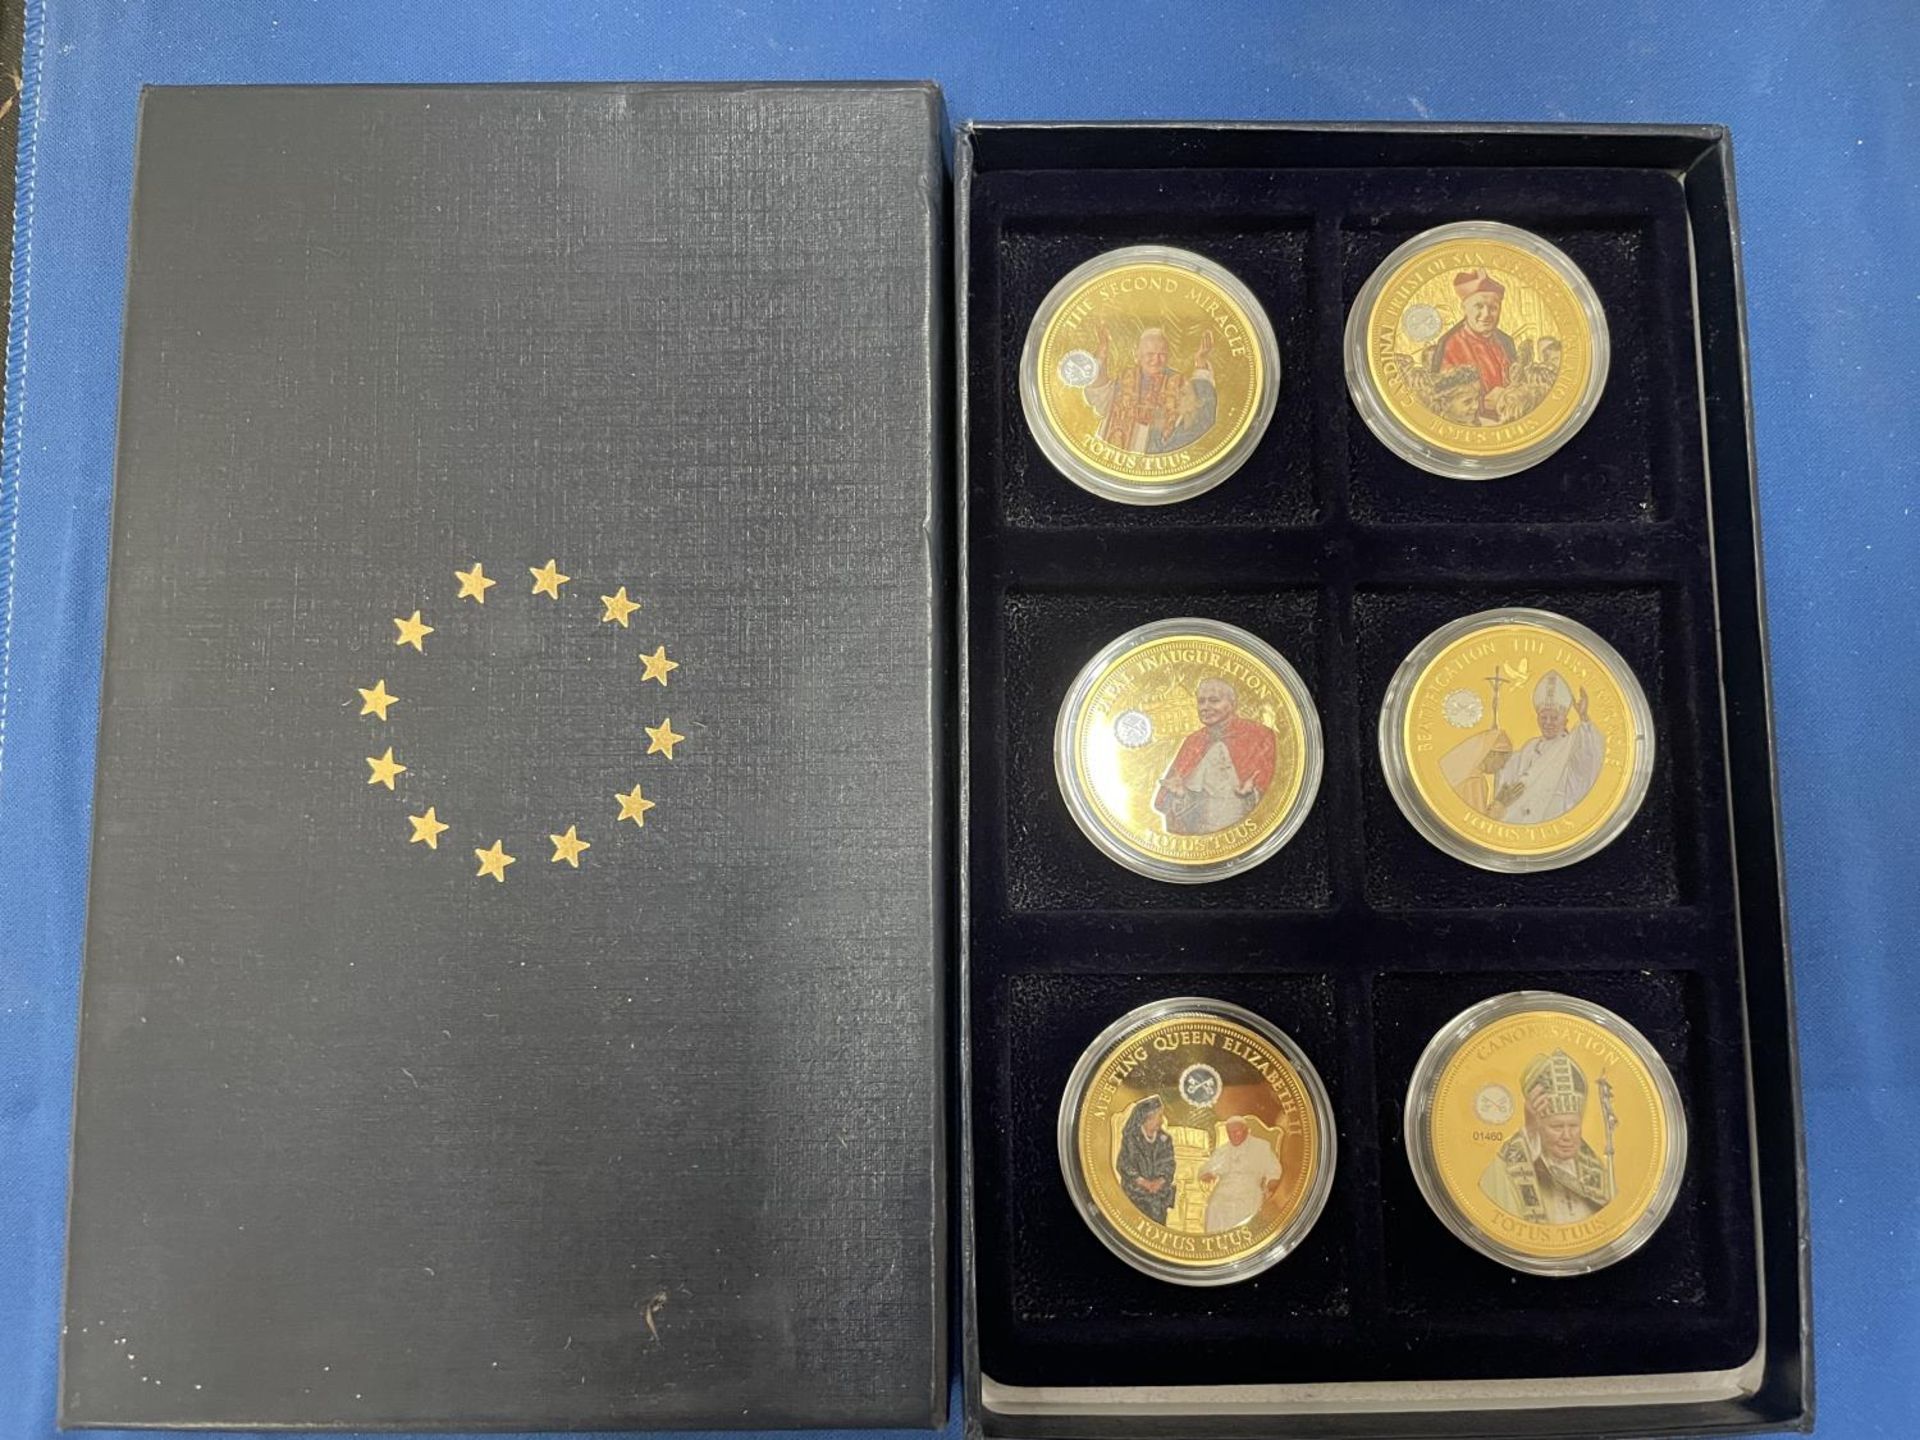 A SET OF SIX LIMITED EDITION GOLD PLATED COINS DEPICTING POPE IN 2014 BY THE EU COMMISSION AND THE - Image 2 of 6